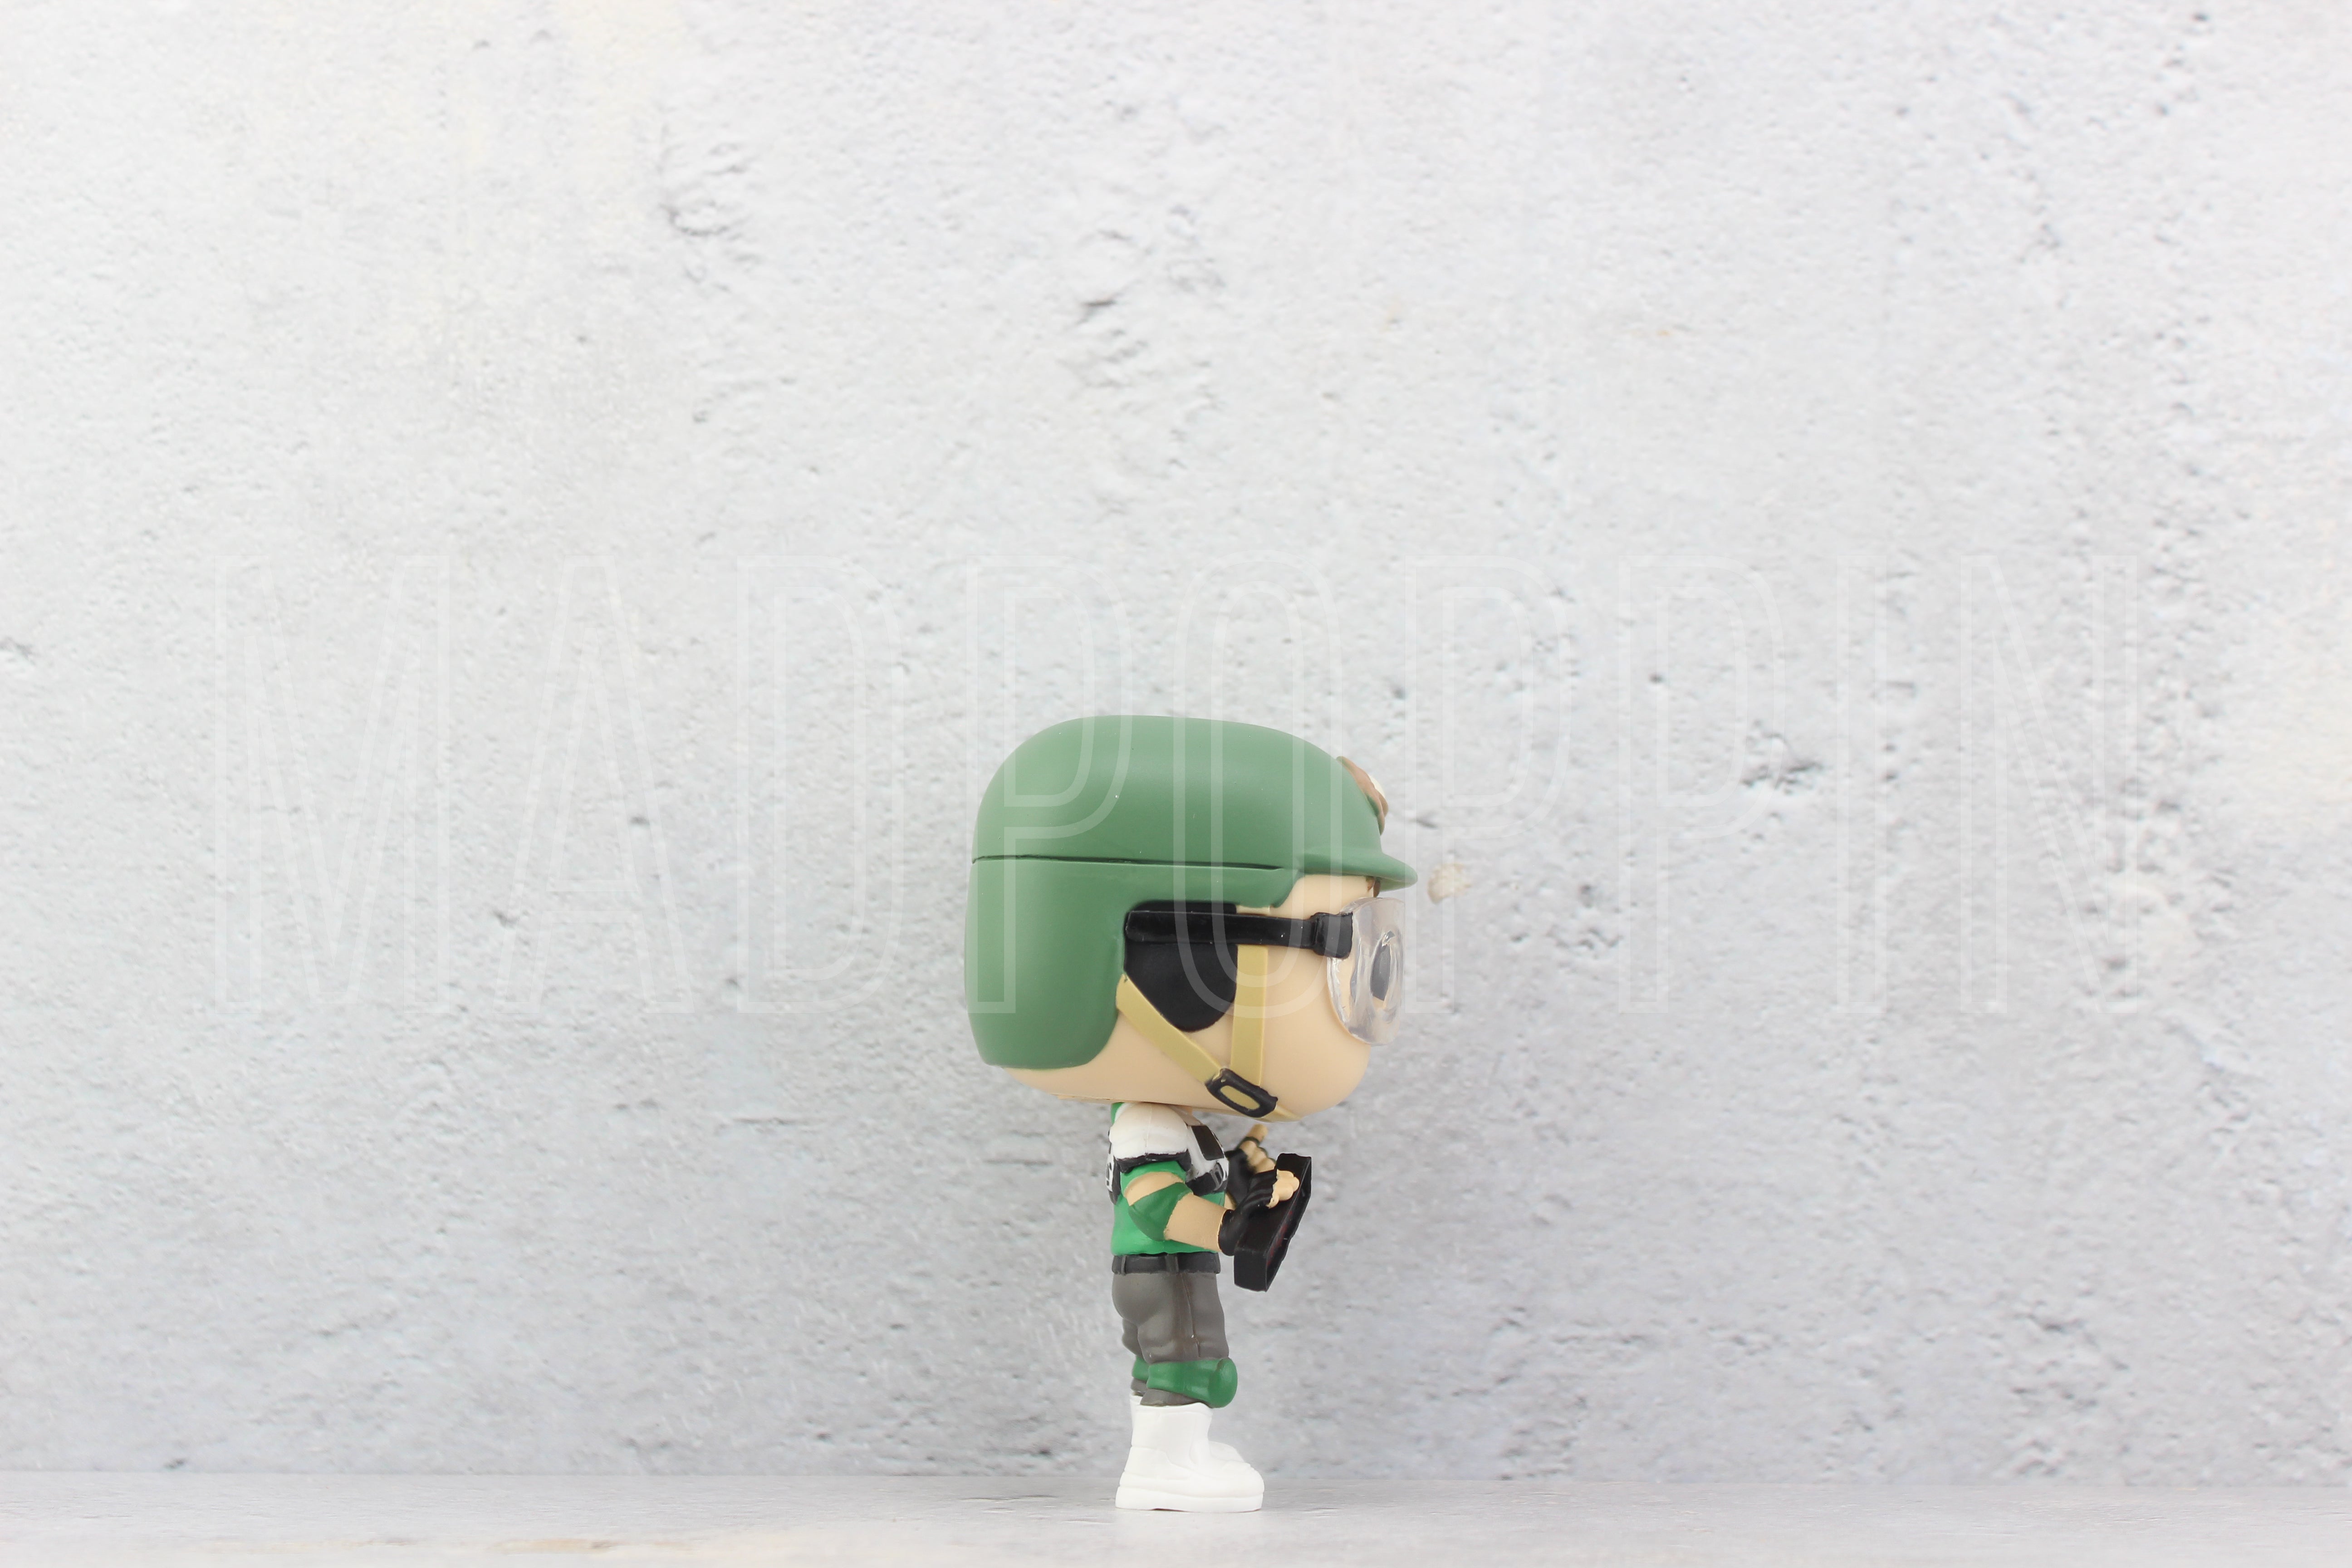 POP! Television: The Office - Dwight Schrute as Recyclops (Out of Box/Loose)